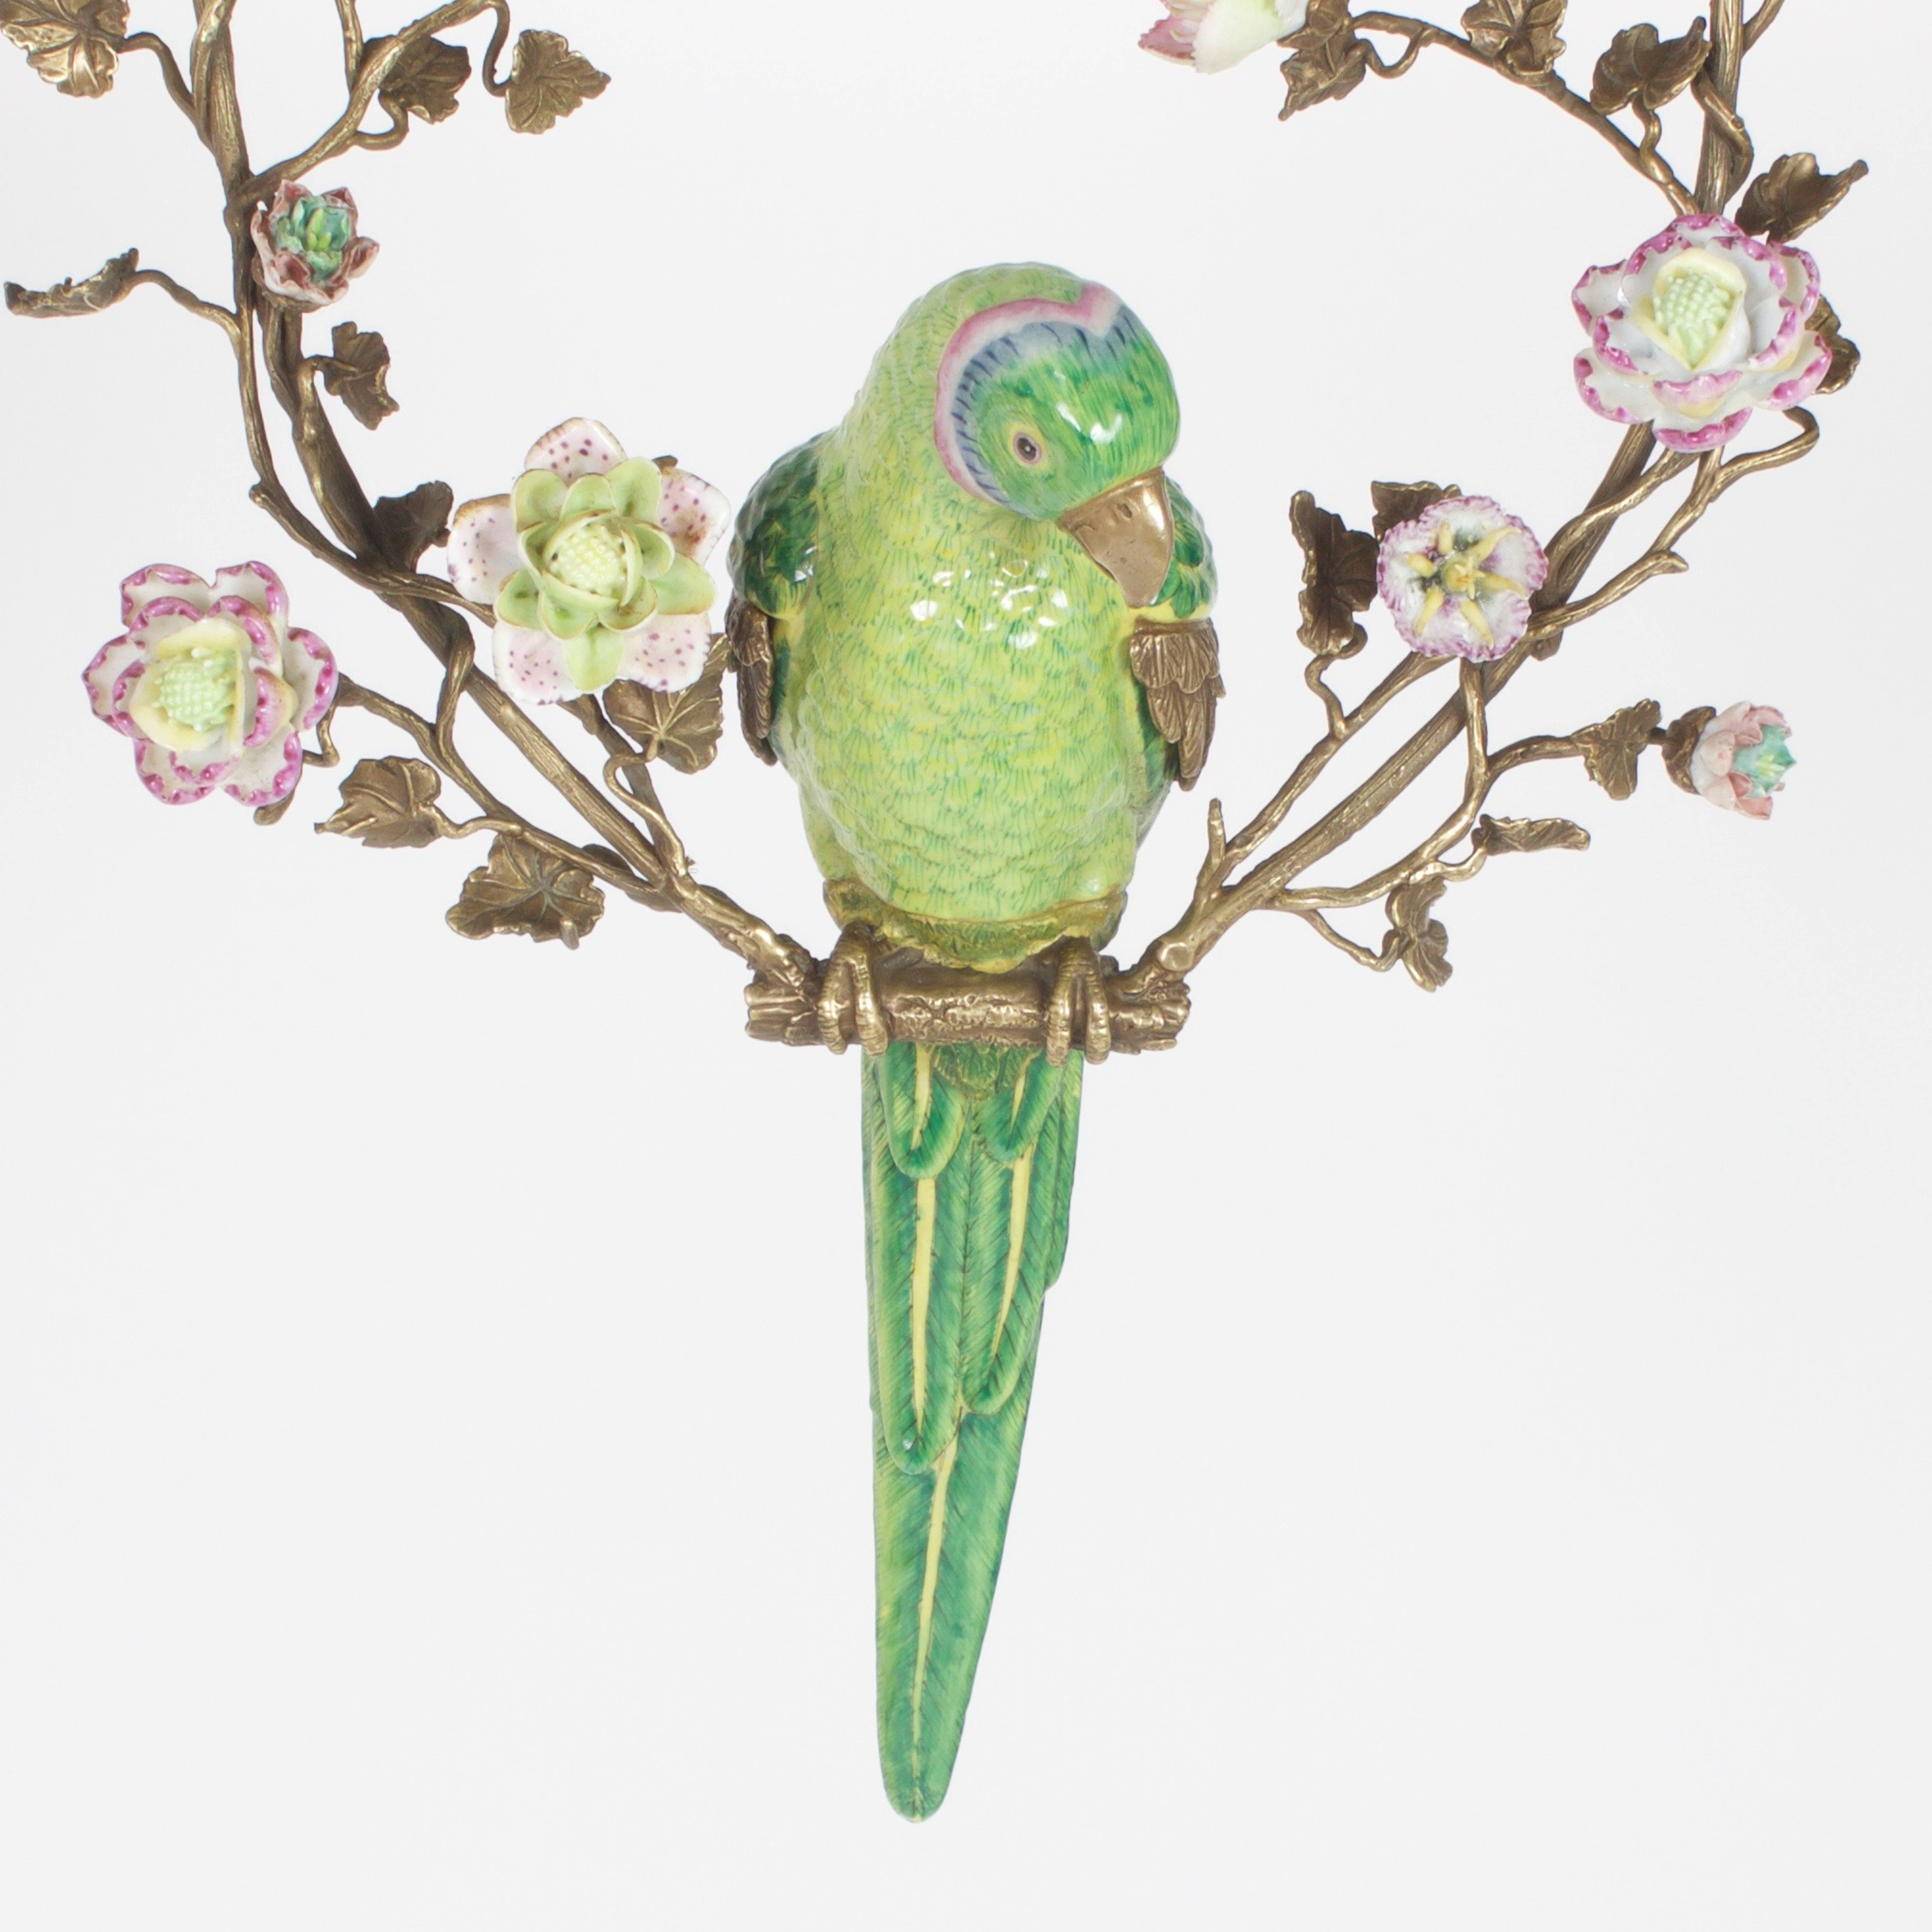 Chinoiserie Inspired Opposing Pair of French Porcelain Parrots In Floral Hoops